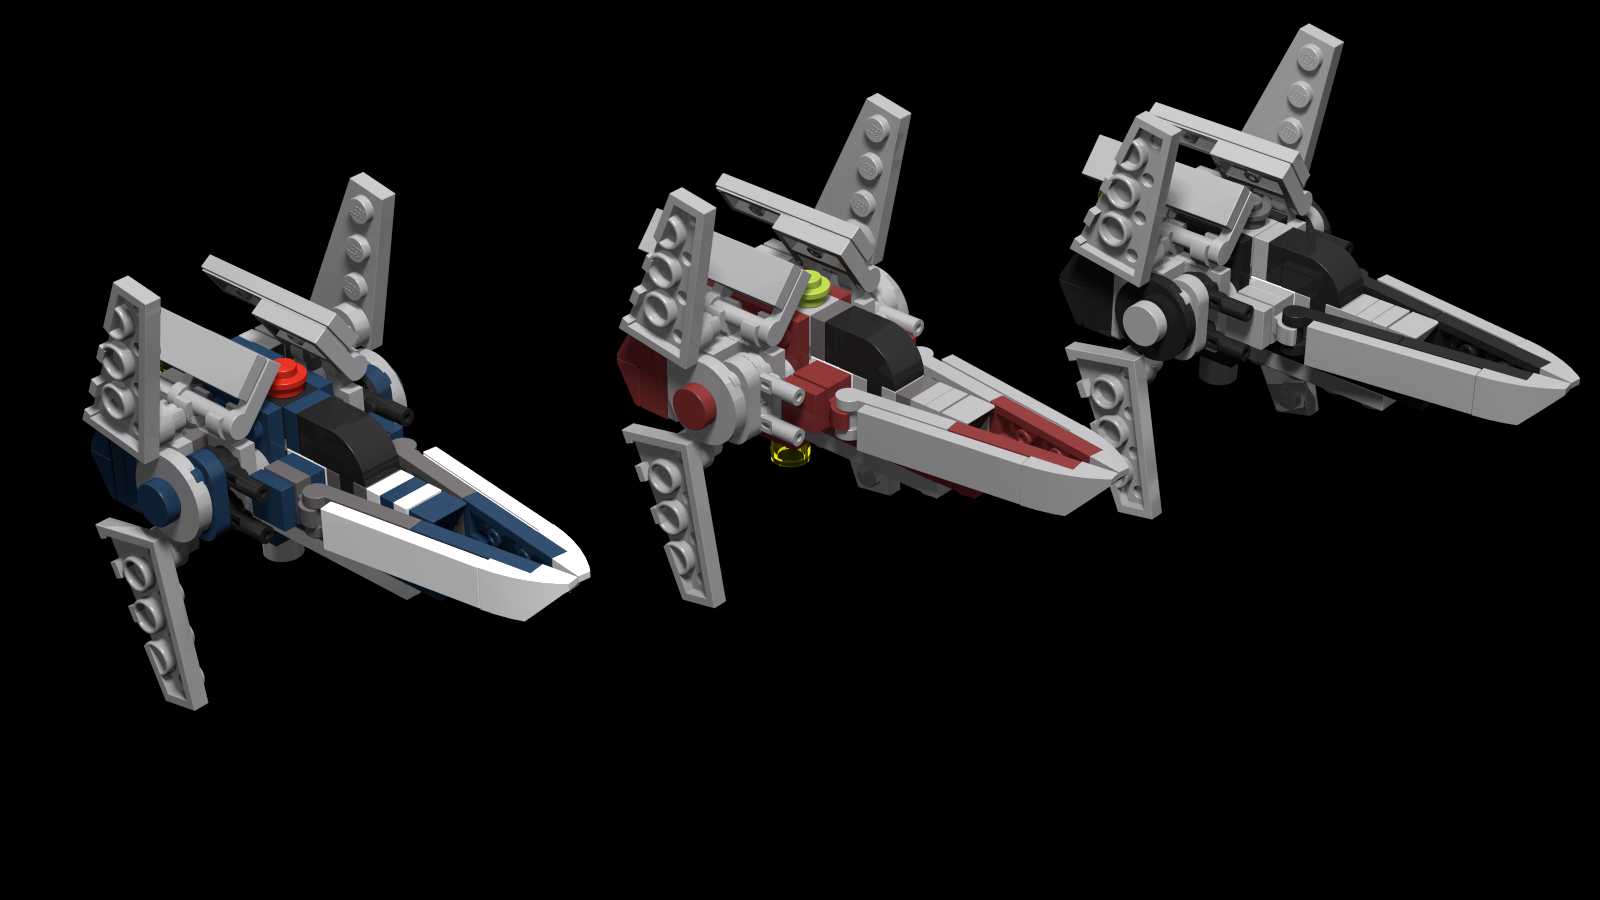 LEGO MOC V Wing Starfighter Sized:84 Scale By MasterBrickSeparator. Rebrickable With LEGO